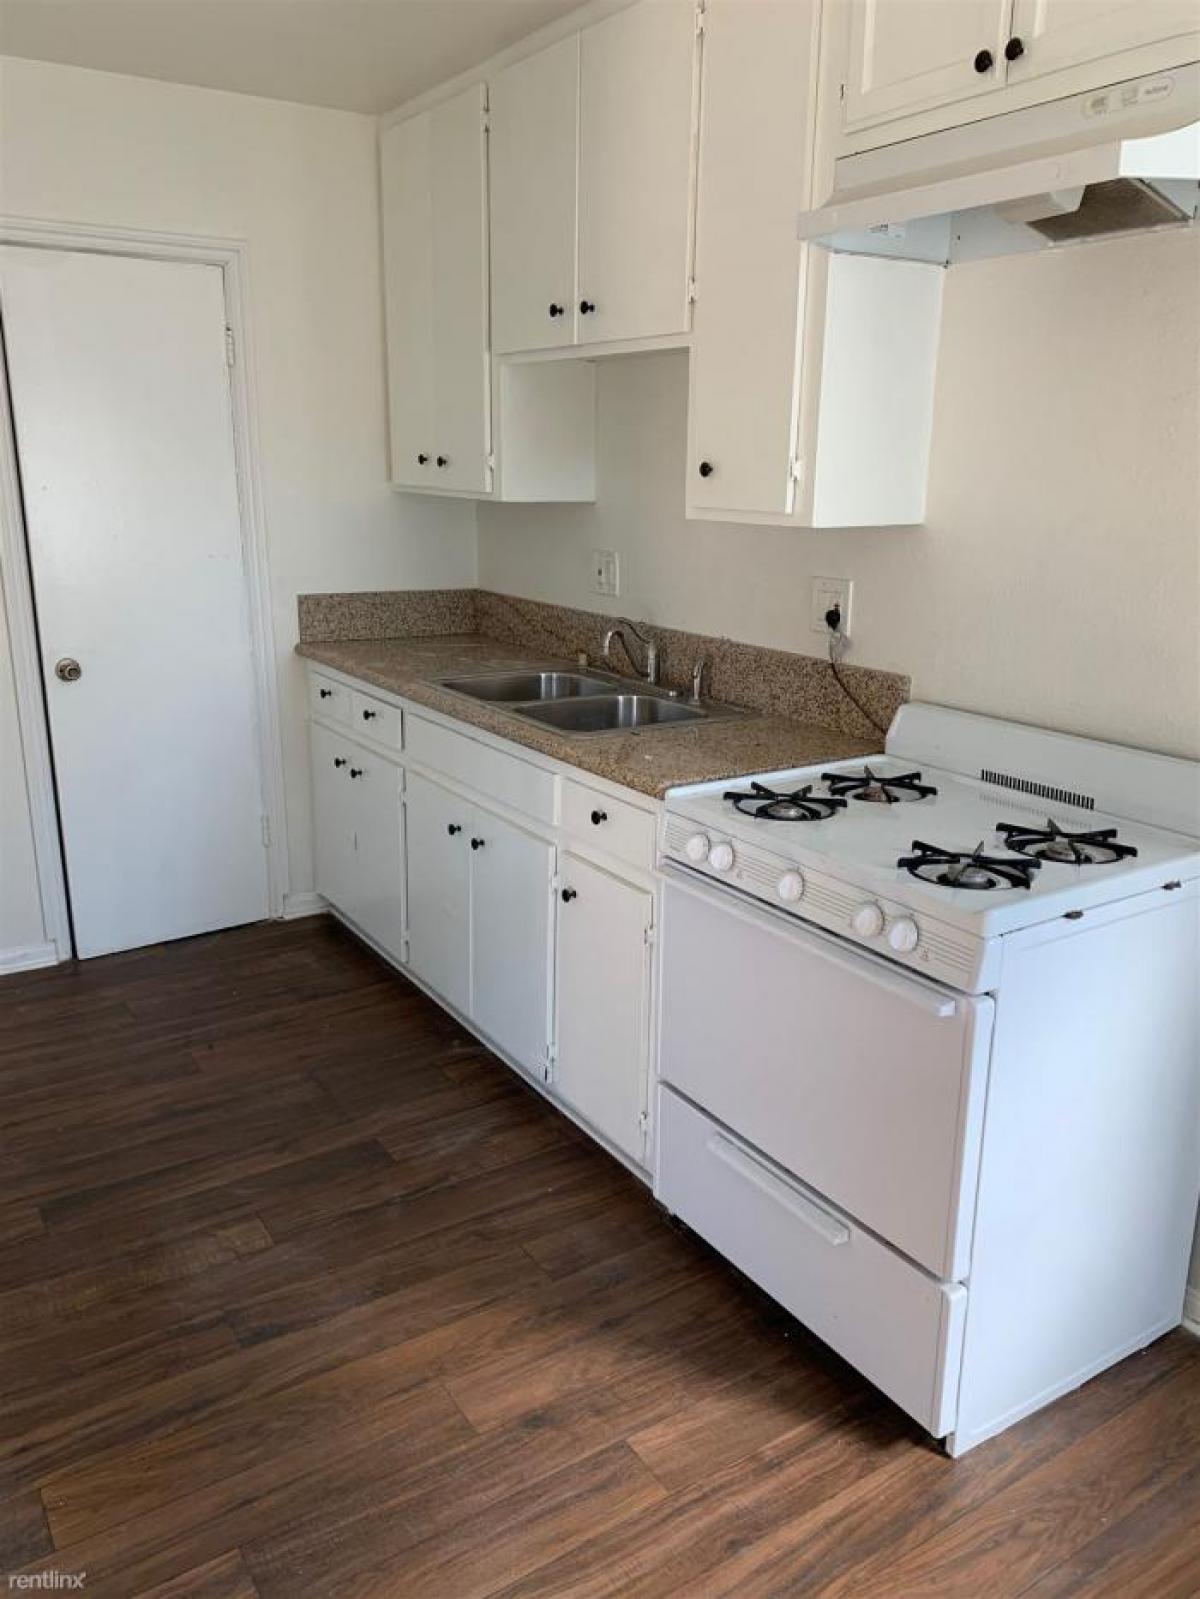 Picture of Apartment For Rent in West Covina, California, United States